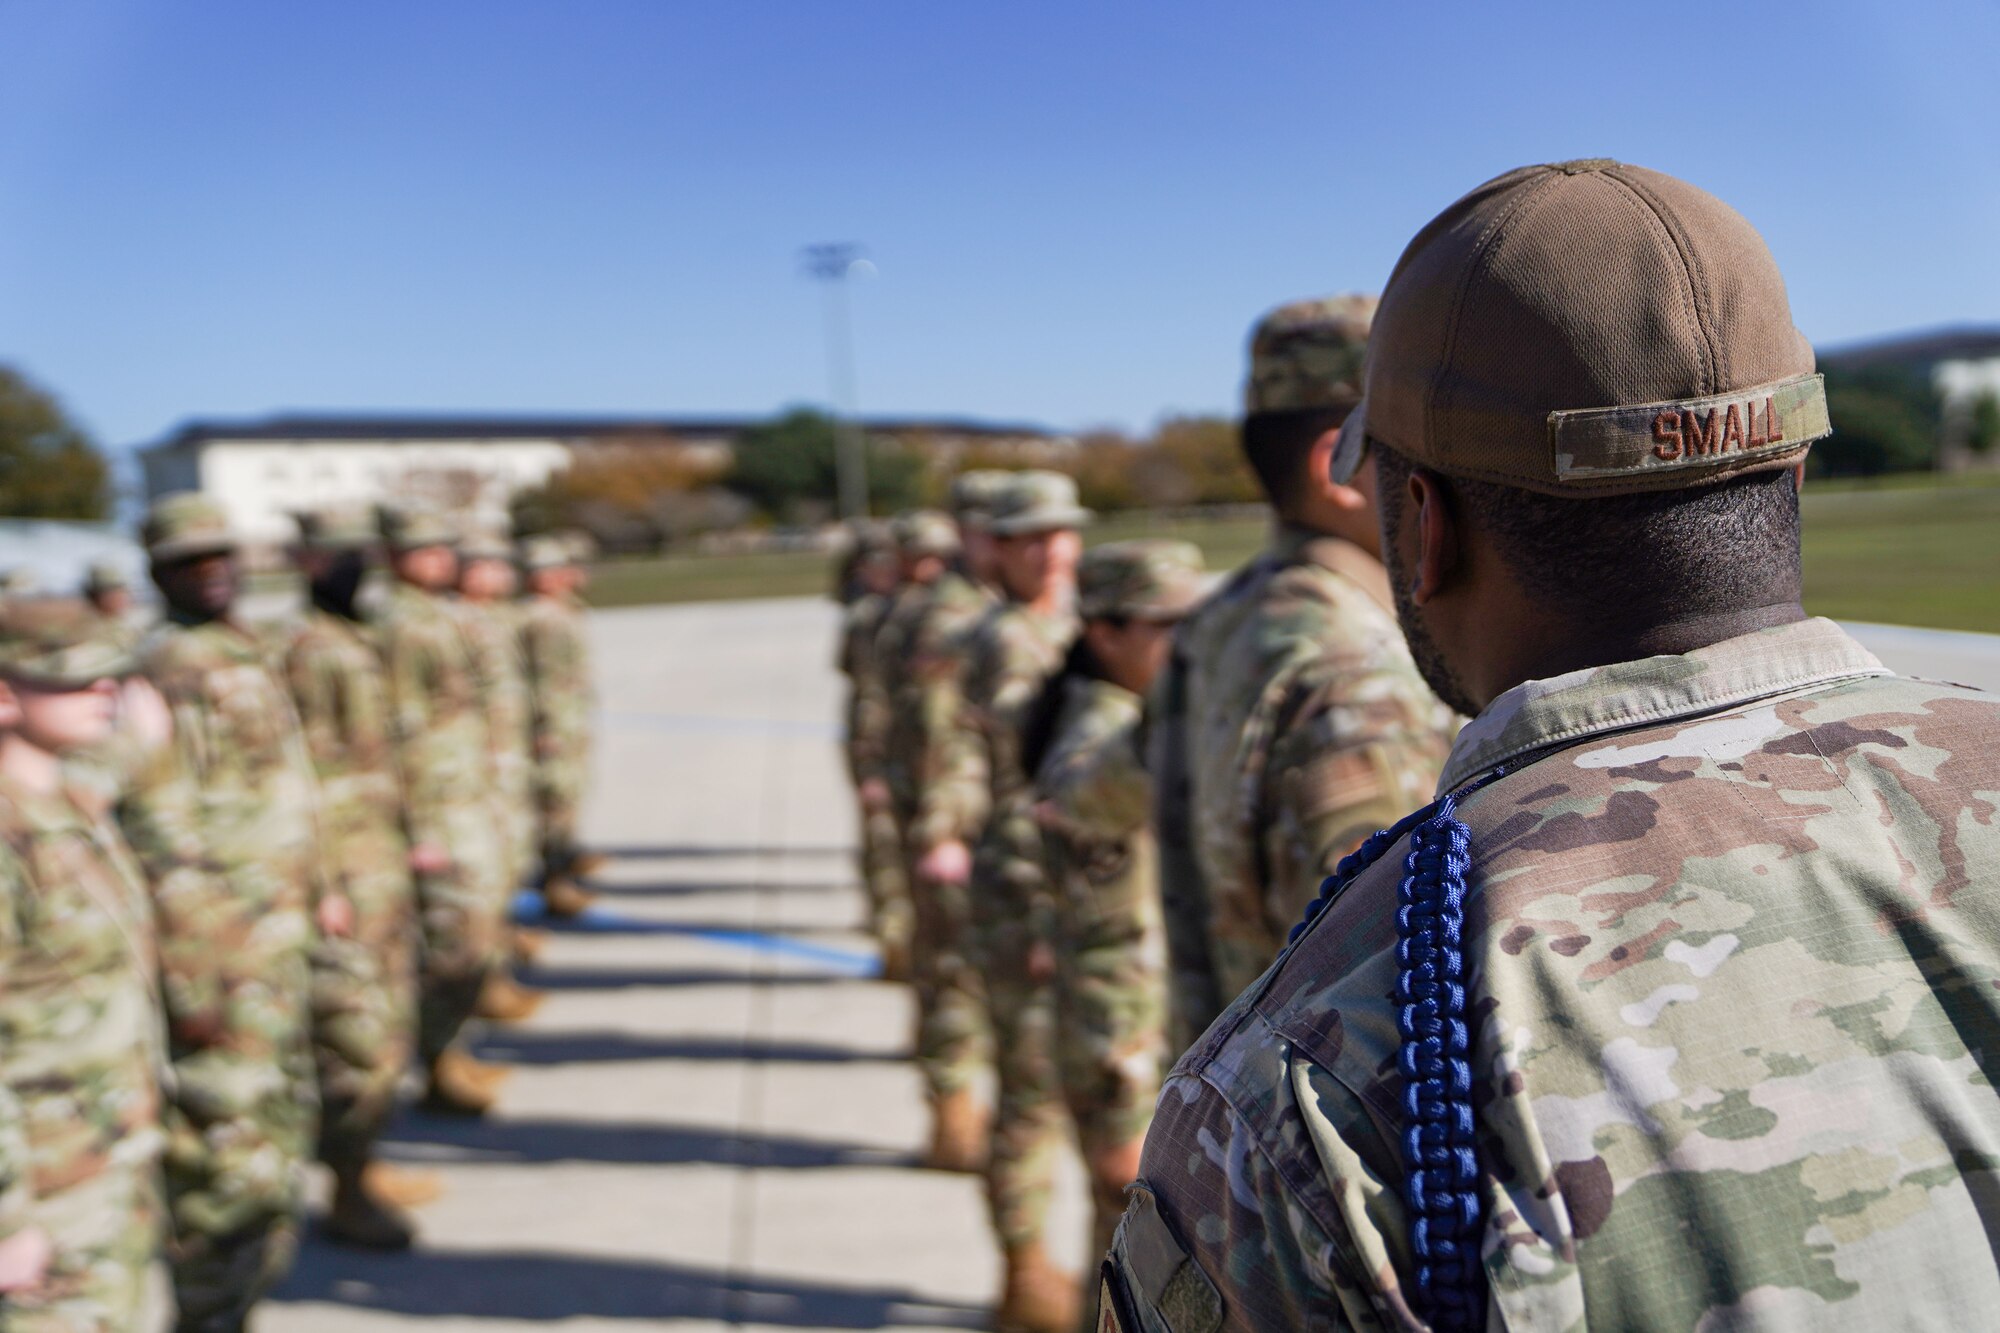 U.S. Air Force Tech Sgt. Kadarryl Small, 336th Training Squadron military training leader, inspects Airmen in training during open ranks at Keesler Air Force Base on Nov. 28, 2022.